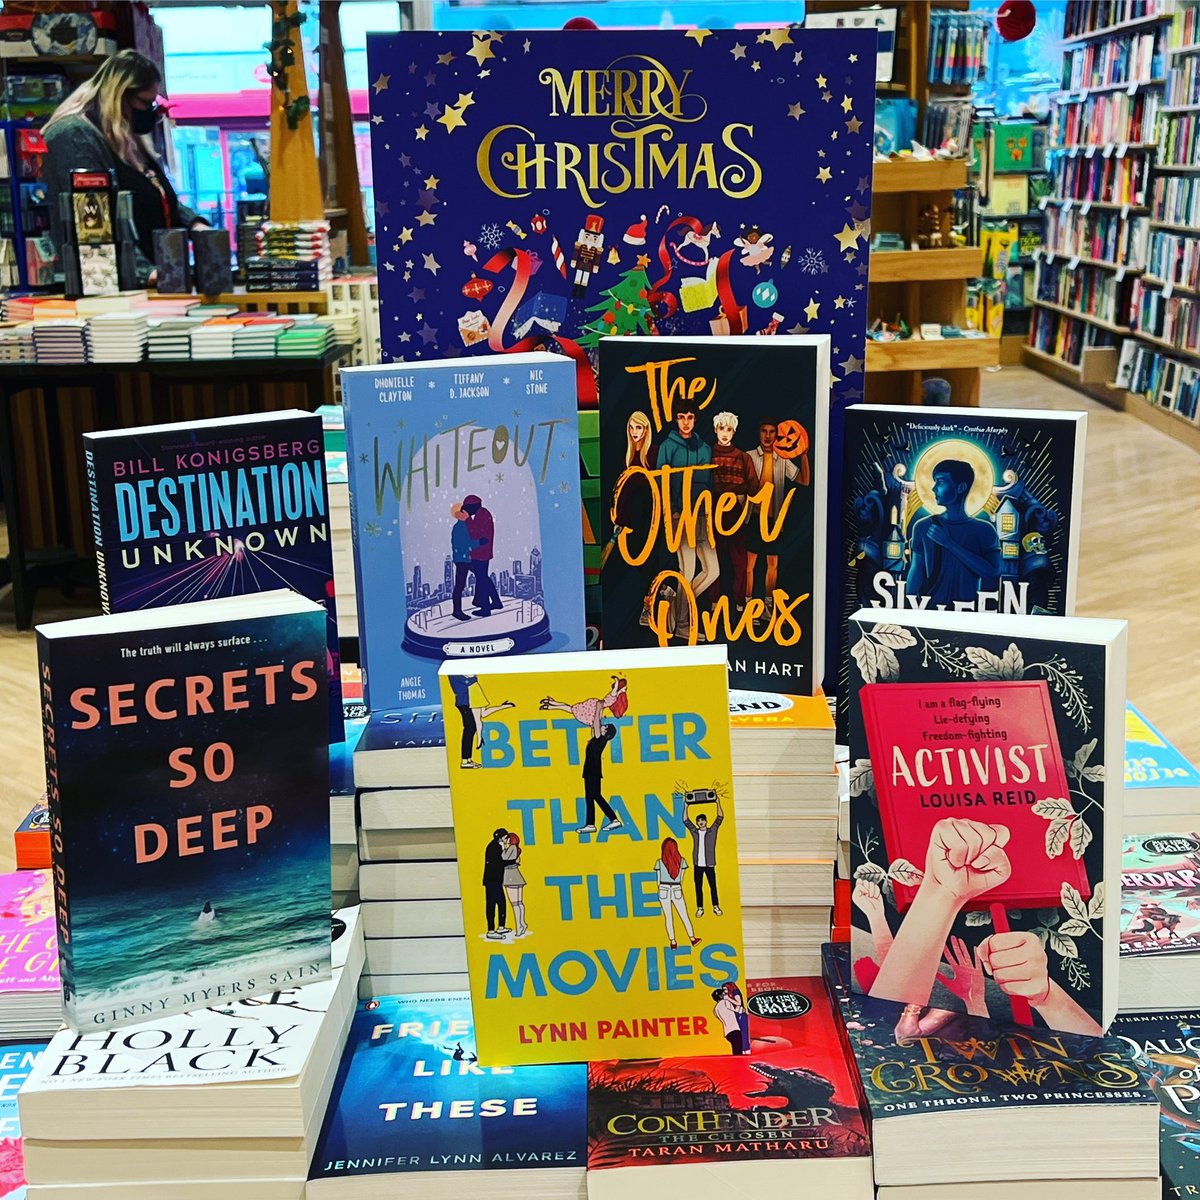 Can you hear Santa's sleigh bells ringing in the distance? He'll be here sooner than you think! If you are starting to think about picking up some Christmas presents for yourself or your loved ones, we have some brilliant new titles that have just come into store!